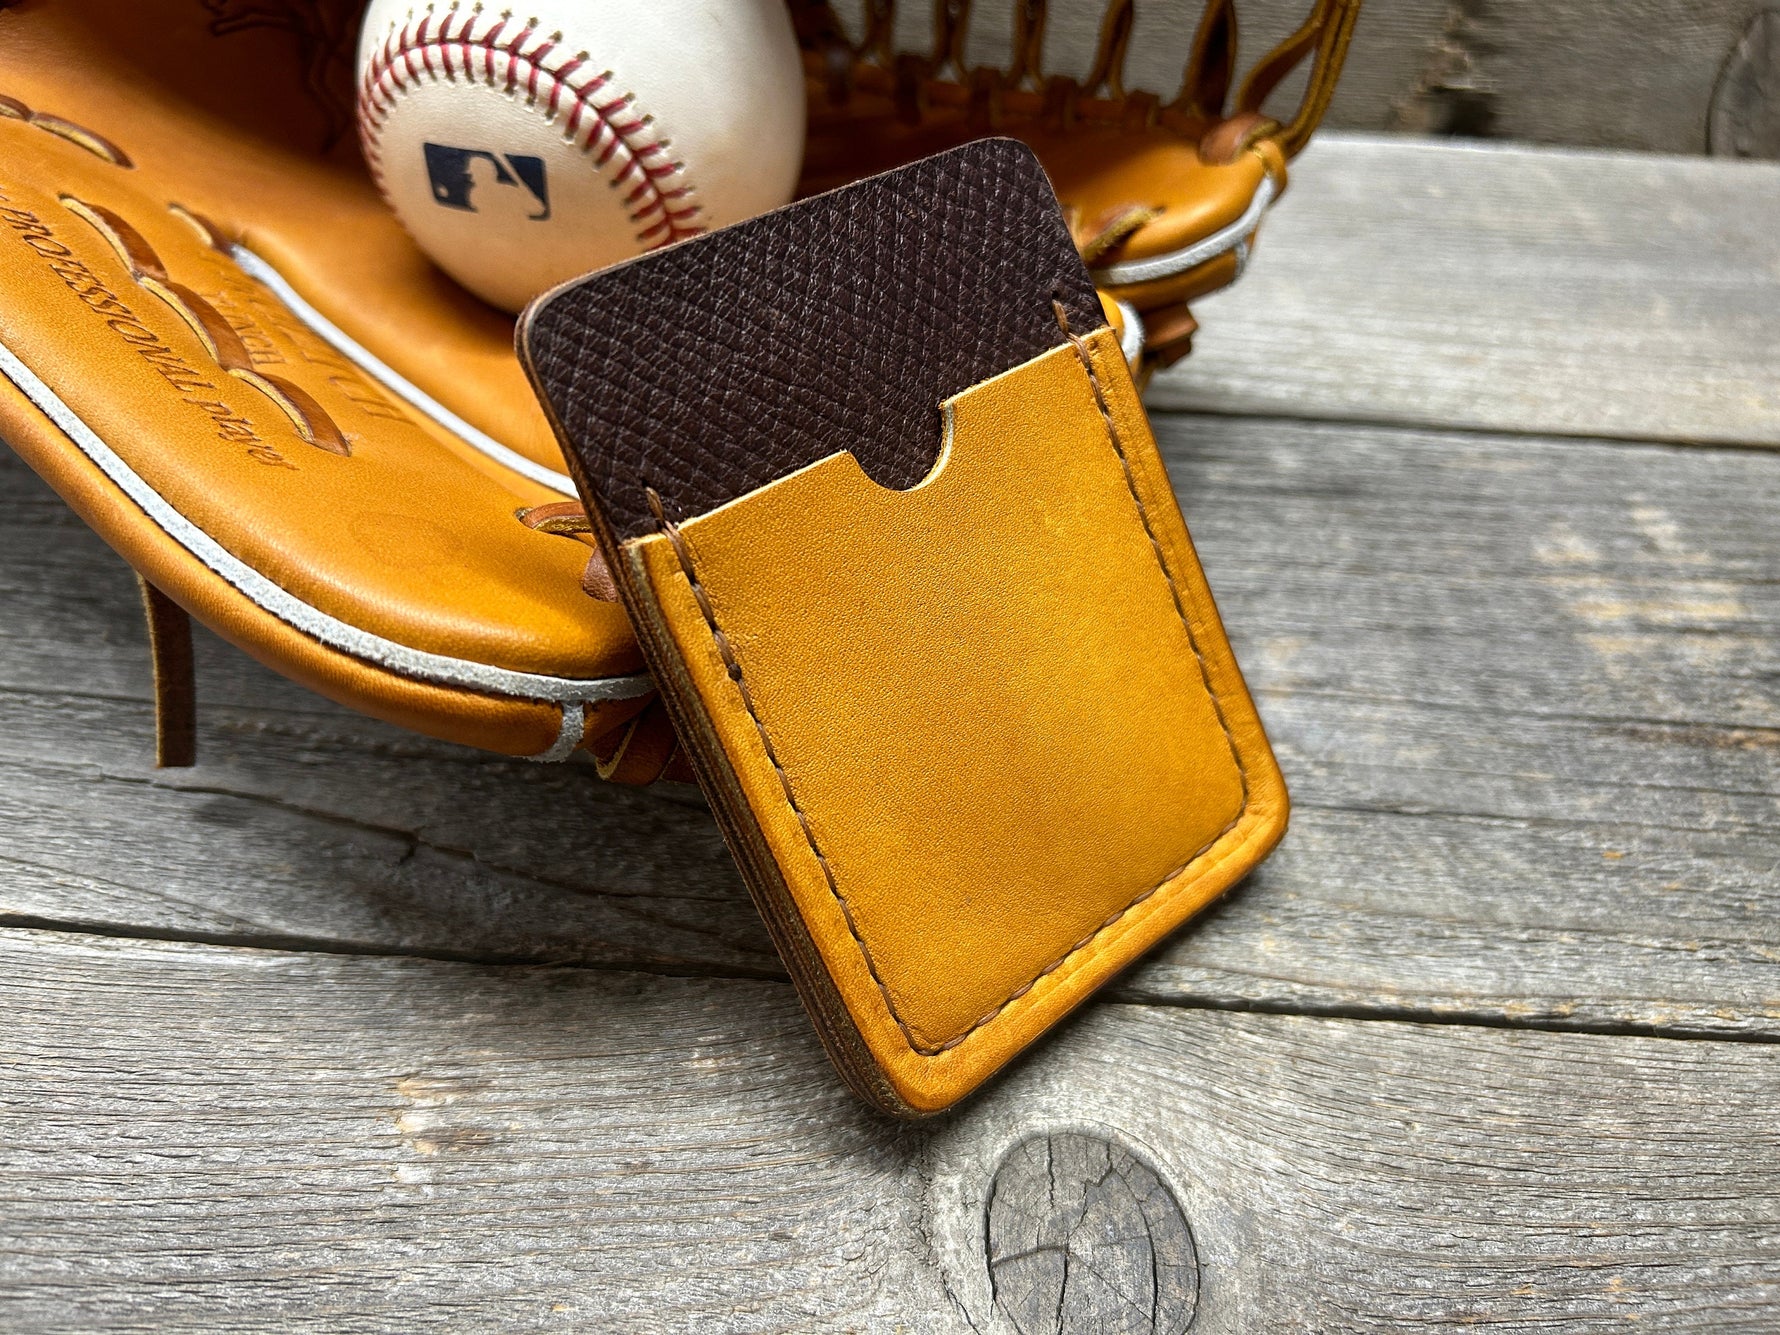 Marked down for Christmas!!! Horween Baseball Leather (Heart of the Hide) Top Loading Baseball Glove Wallet with Hidden 3rd Pocket!!